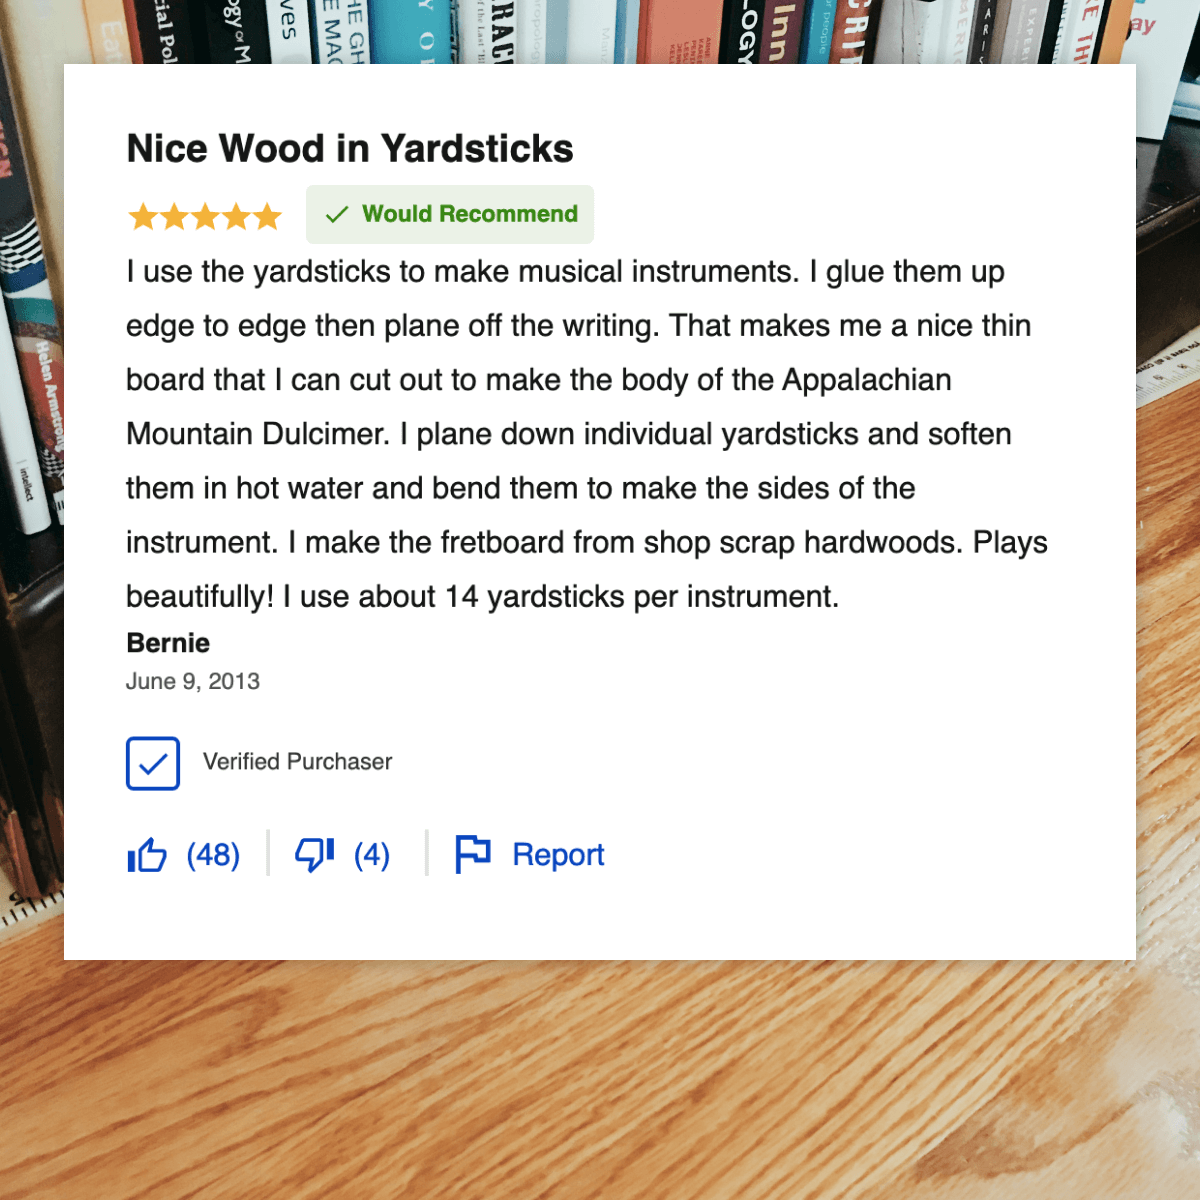 Online review that reads: ‘I use the yardsticks to make musical instruments. I glue them up edge to edge then plane off the writing. That makes me a nice thin board that I can cut out to make the body of the Appalachian Mountain Dulcimer...’